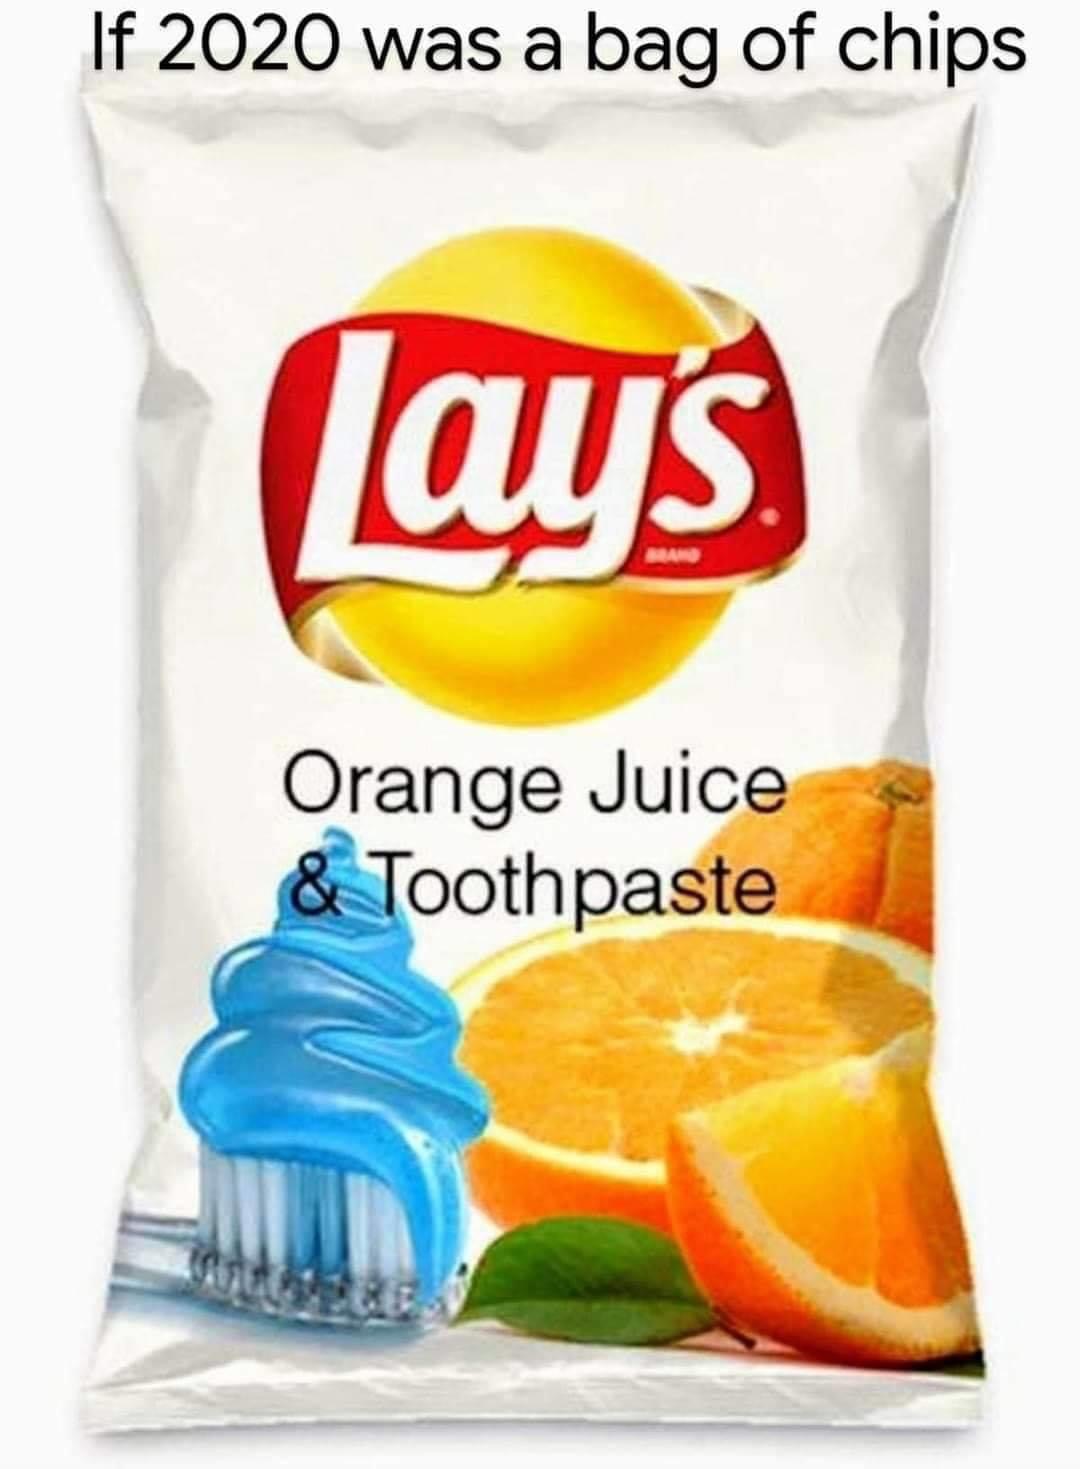 lays potato chips - If 2020 was a bag of chips Lays Orange Juice & Toothpaste